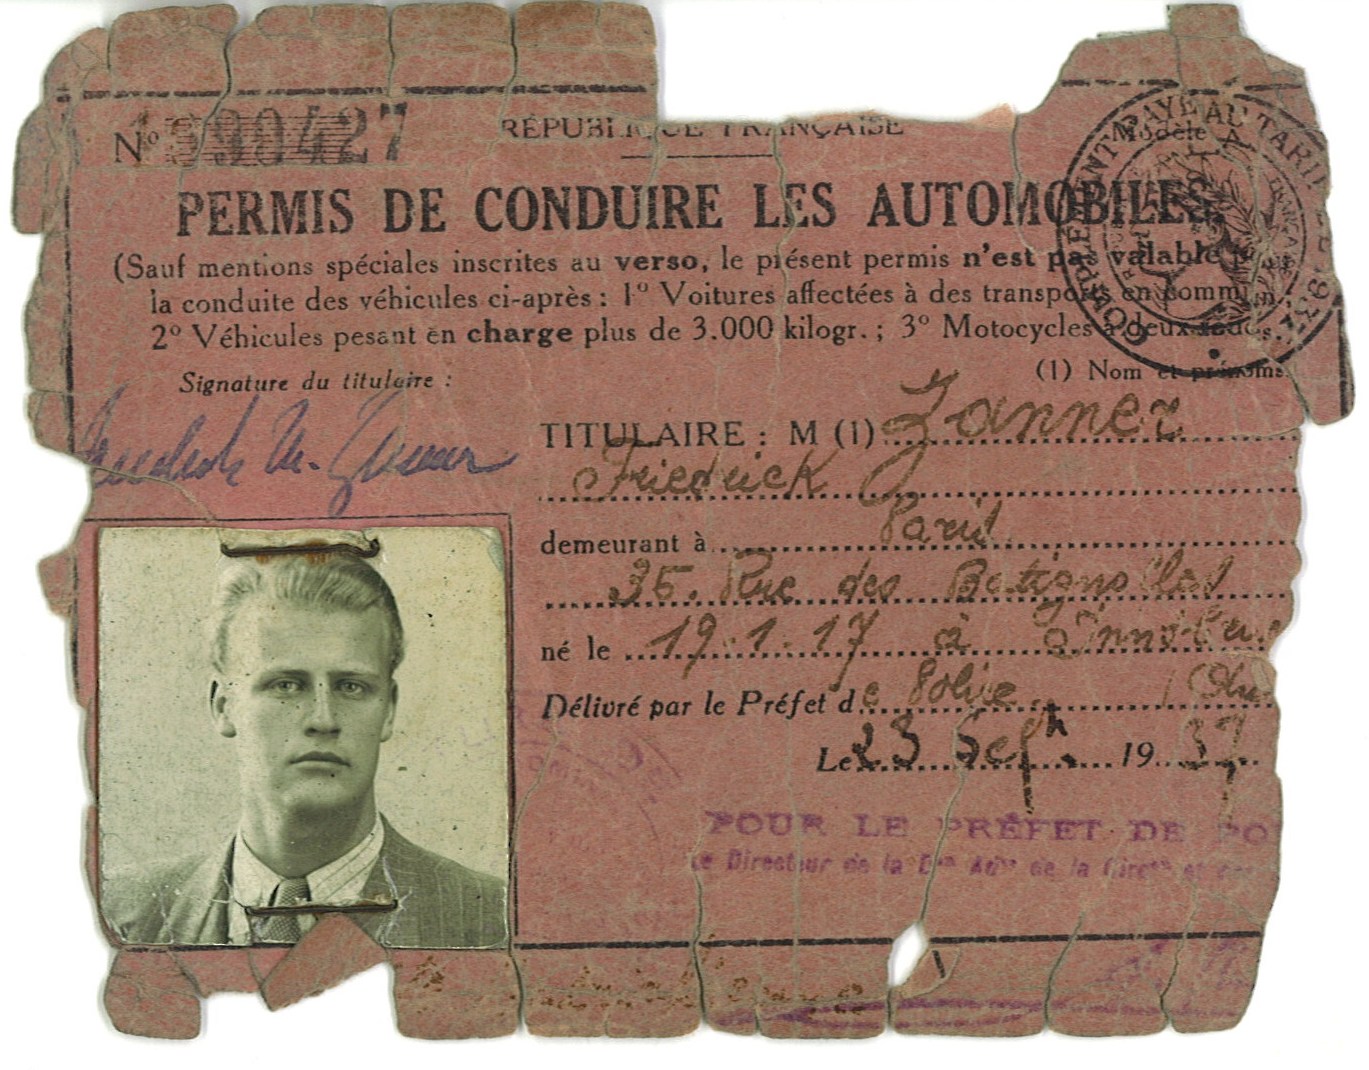 Copy of Friedrich Zanner's driver's license, on display at the Charell exhibition in Neustrelitz.